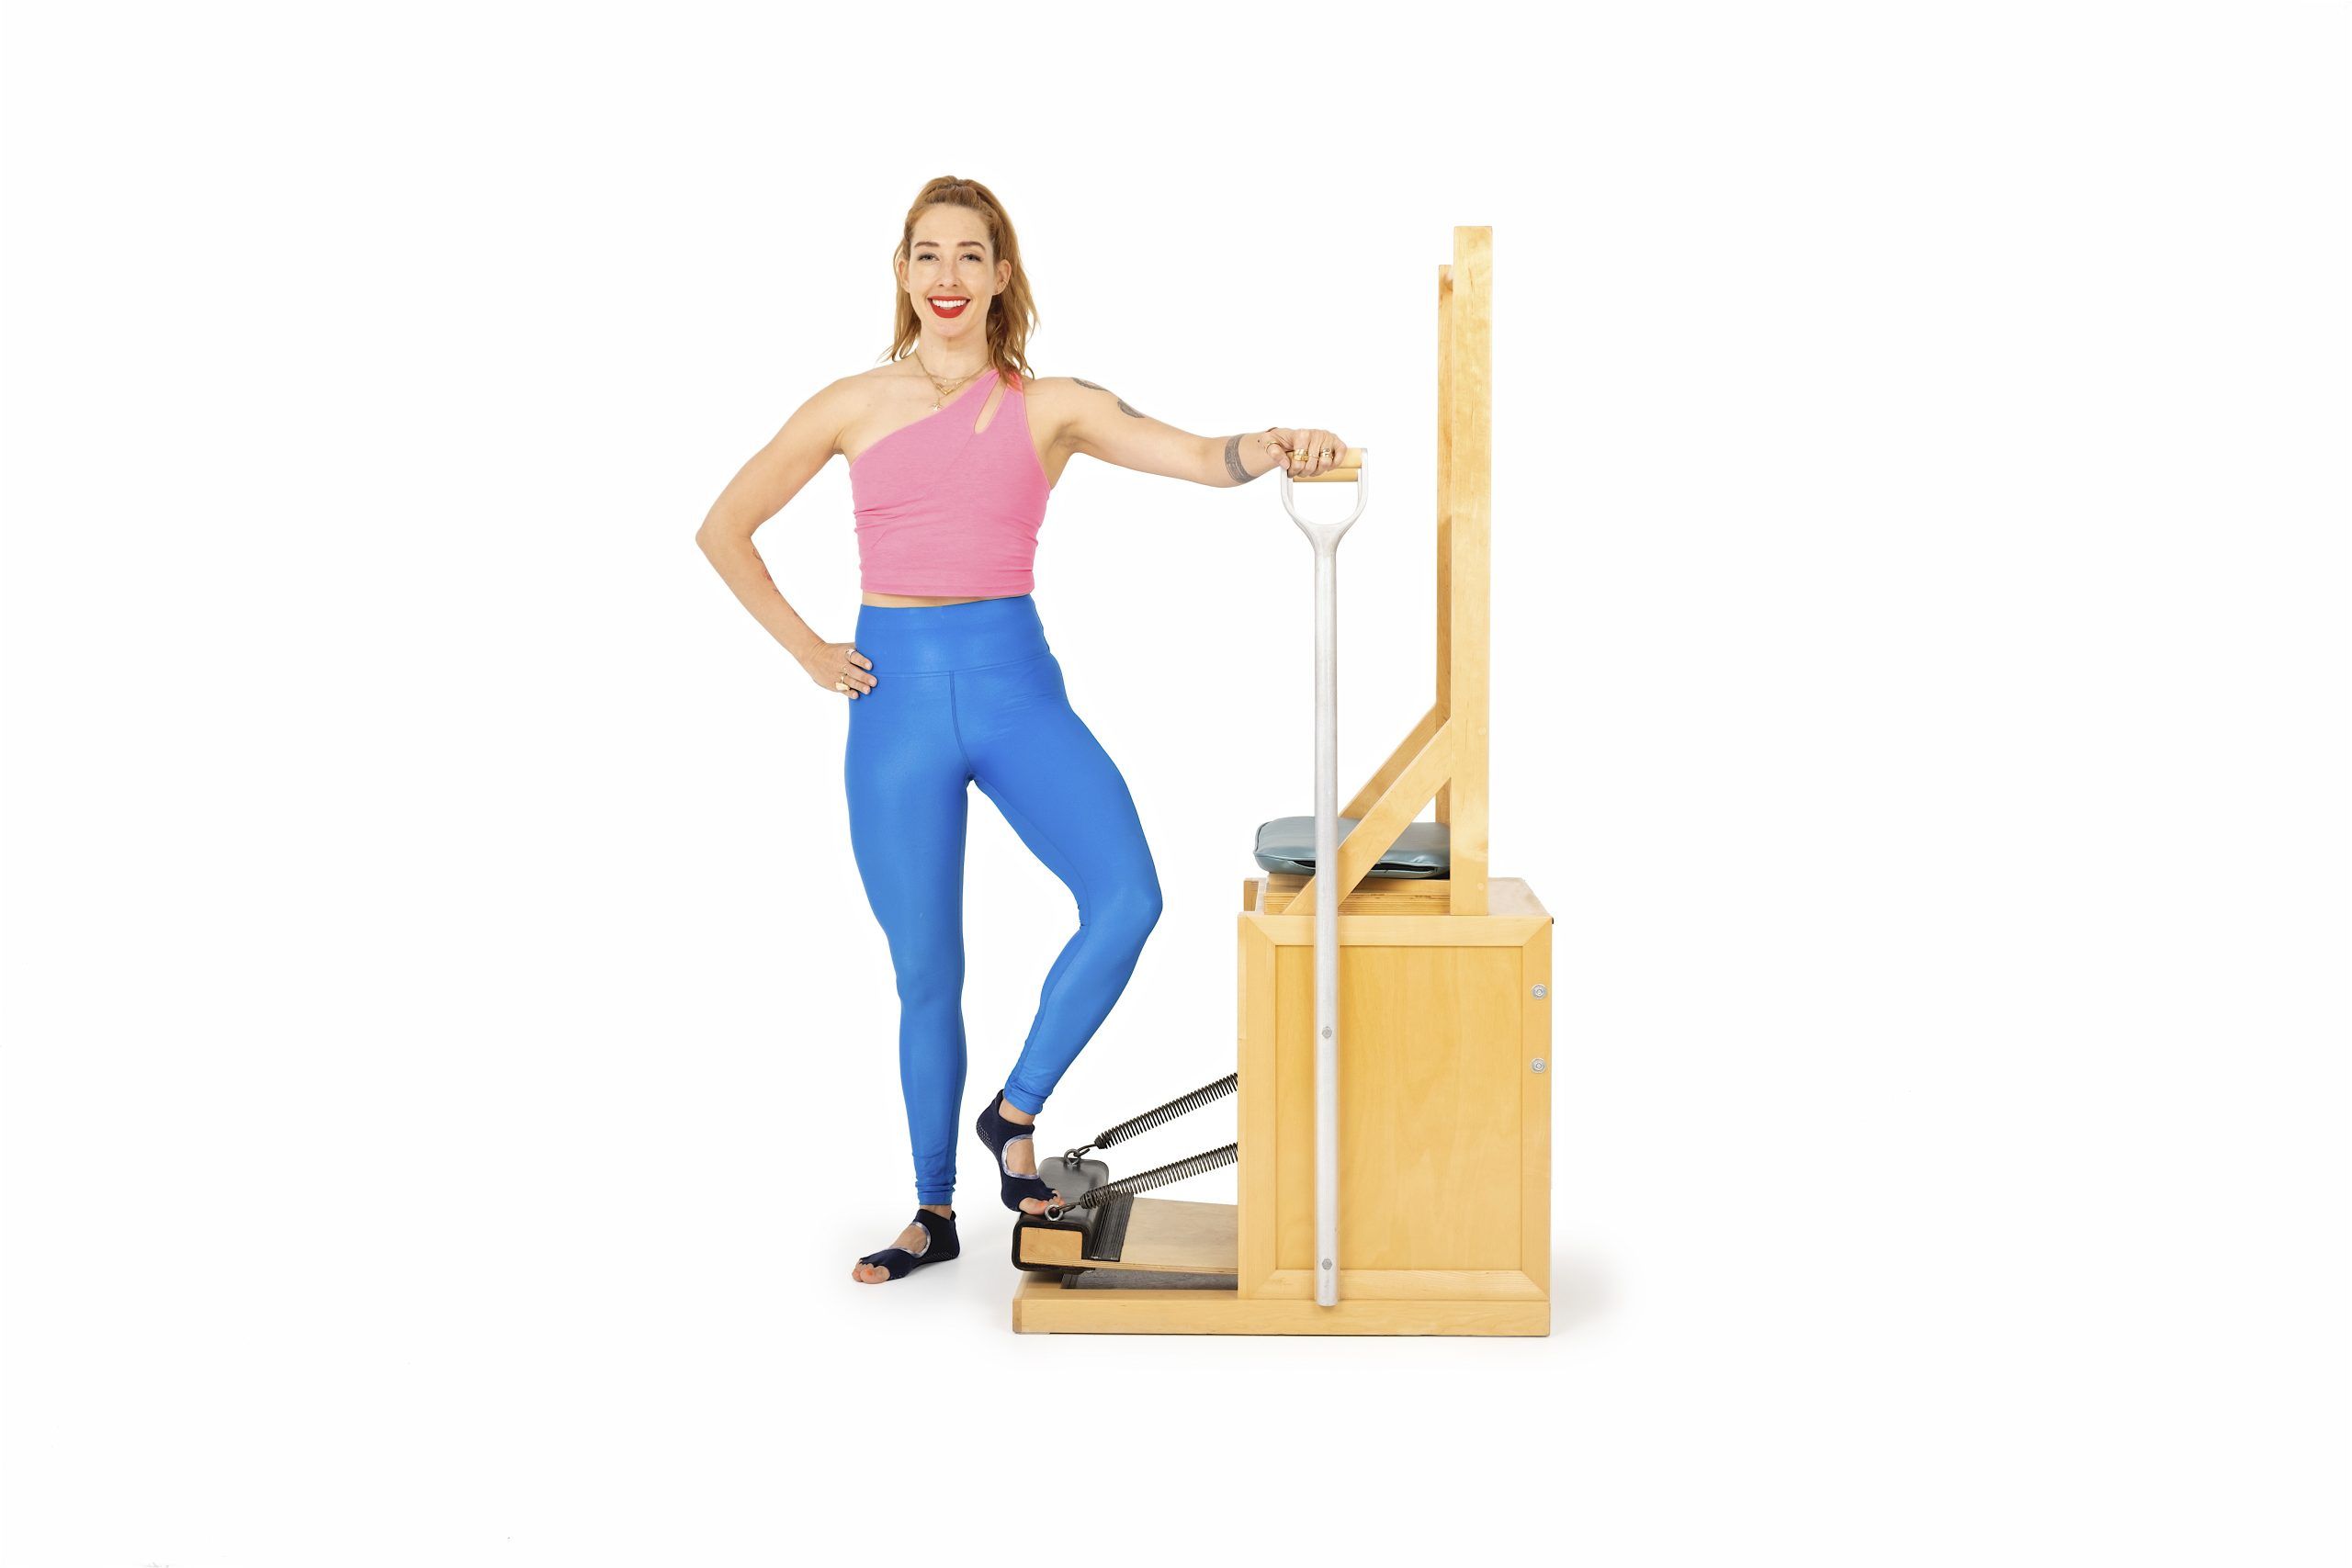 press down side on the high chair online pilates classes